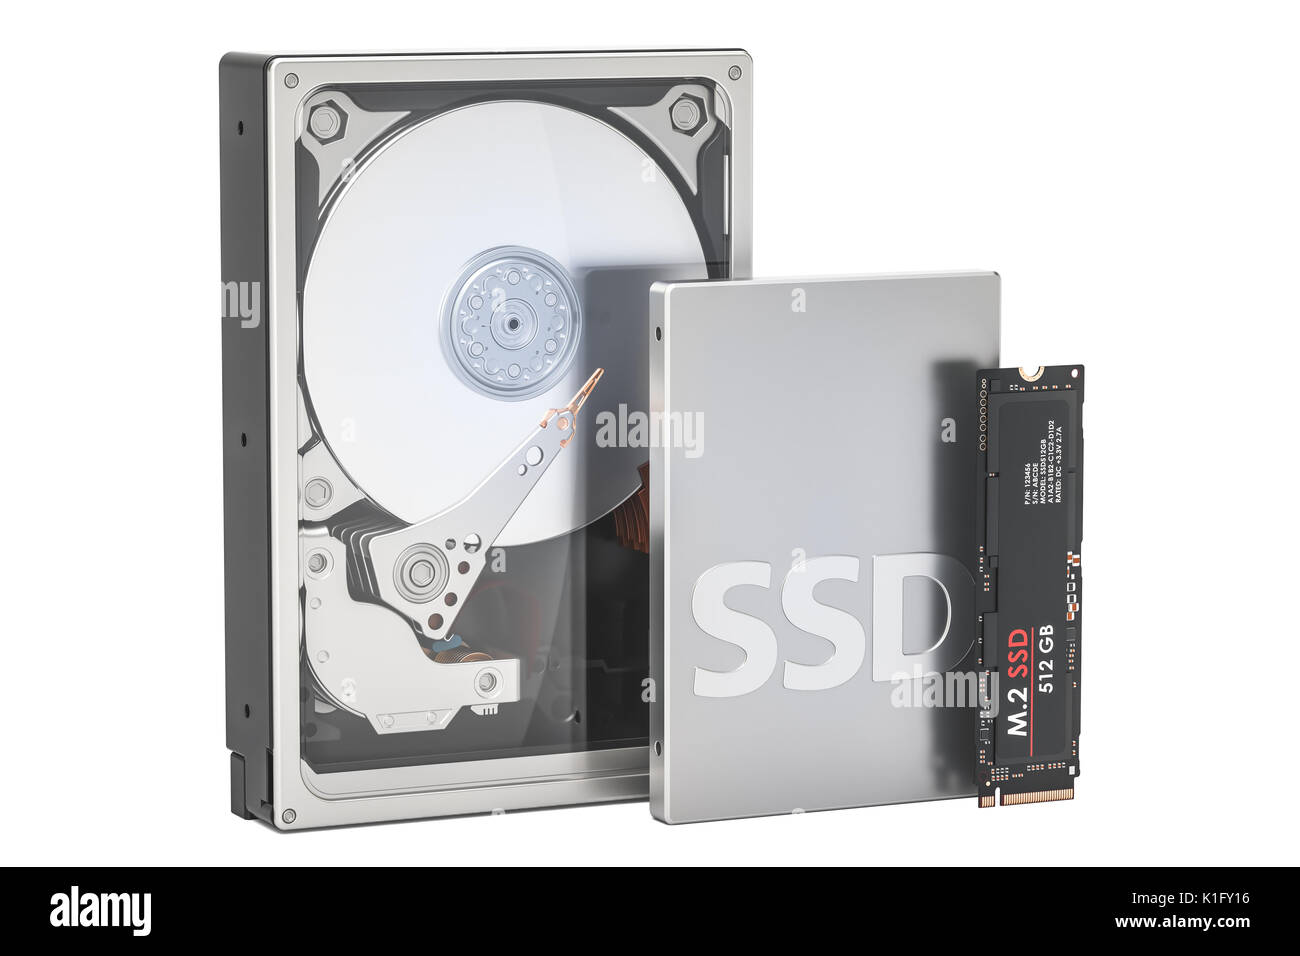 Solid state drive SSD, Hard Disk Drive HDD and M2 SSD, 3D rendering  isolated on white background Stock Photo - Alamy